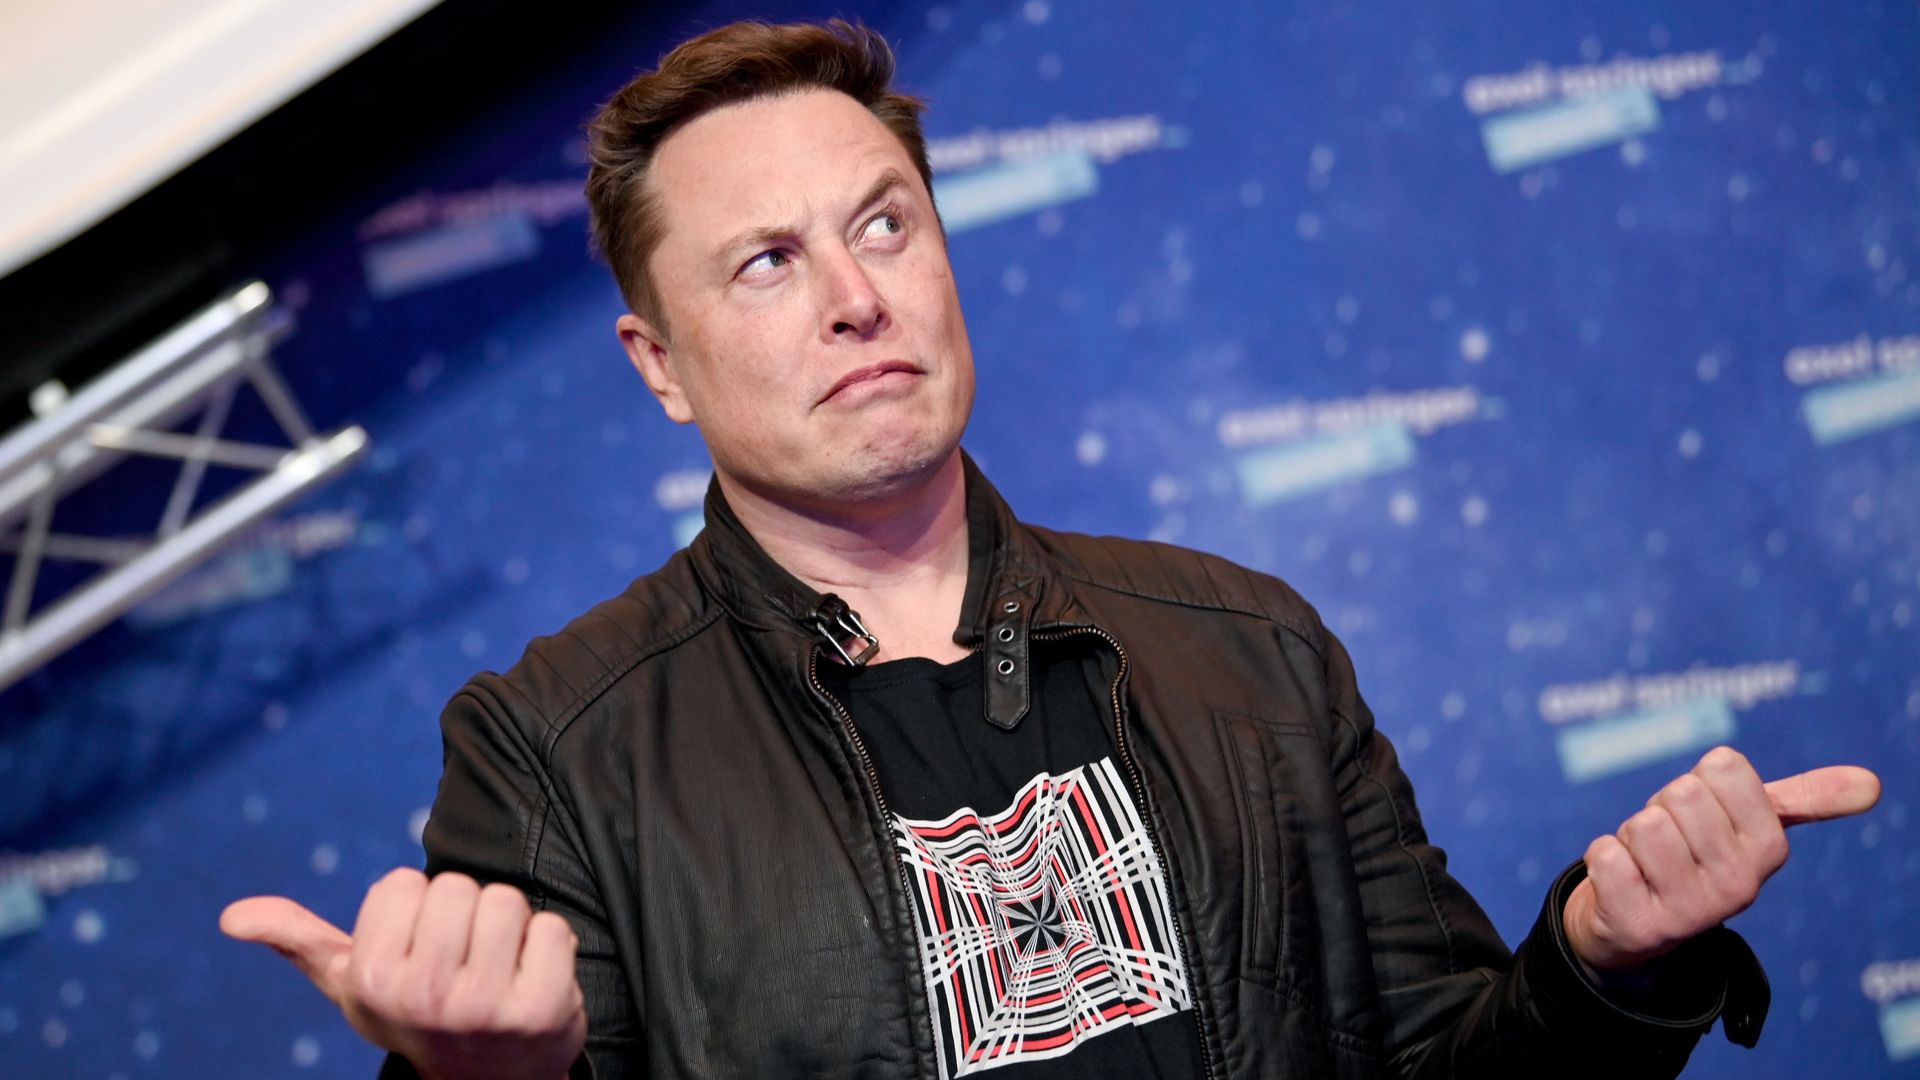 Elon Musk poses for photos with two thumbs up and a quizzical look